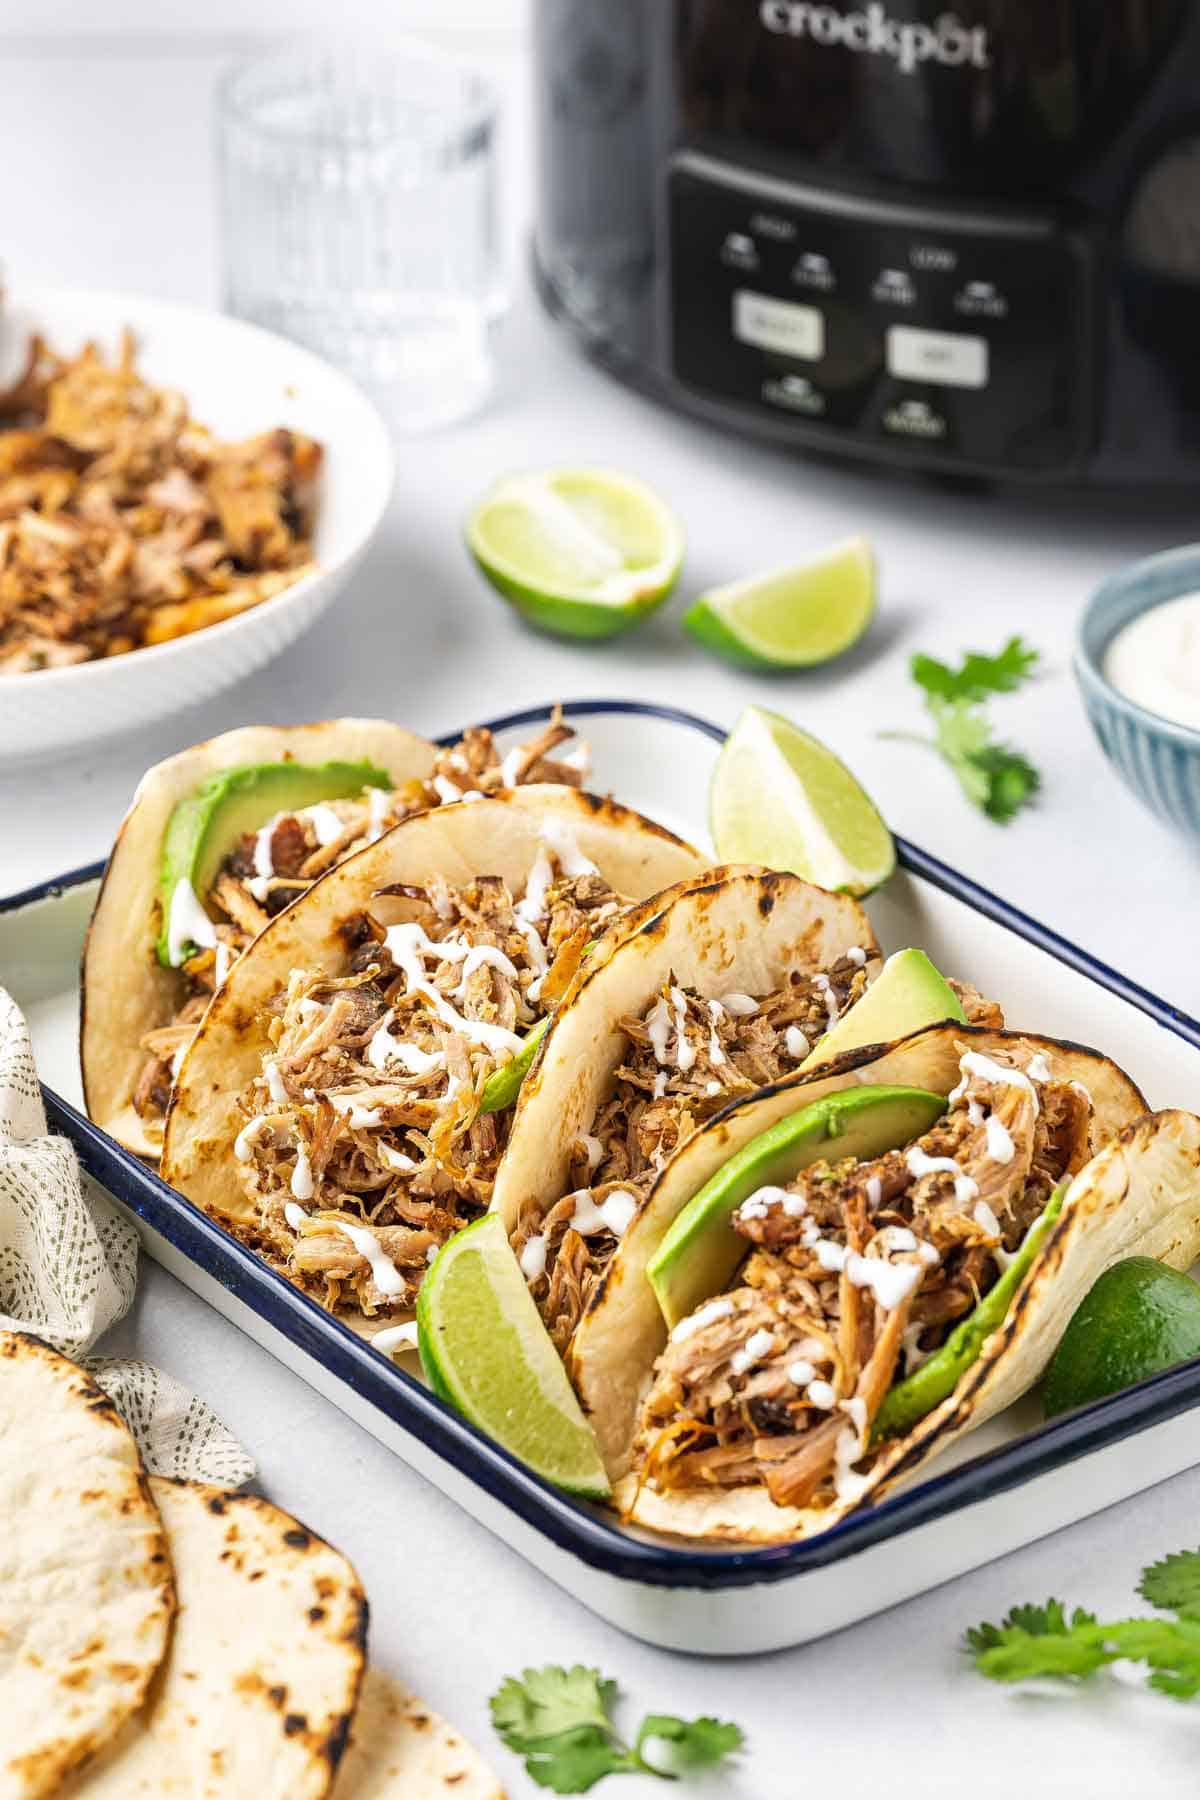 A platter of four tortillas containing shredded slow cooker carnitas.